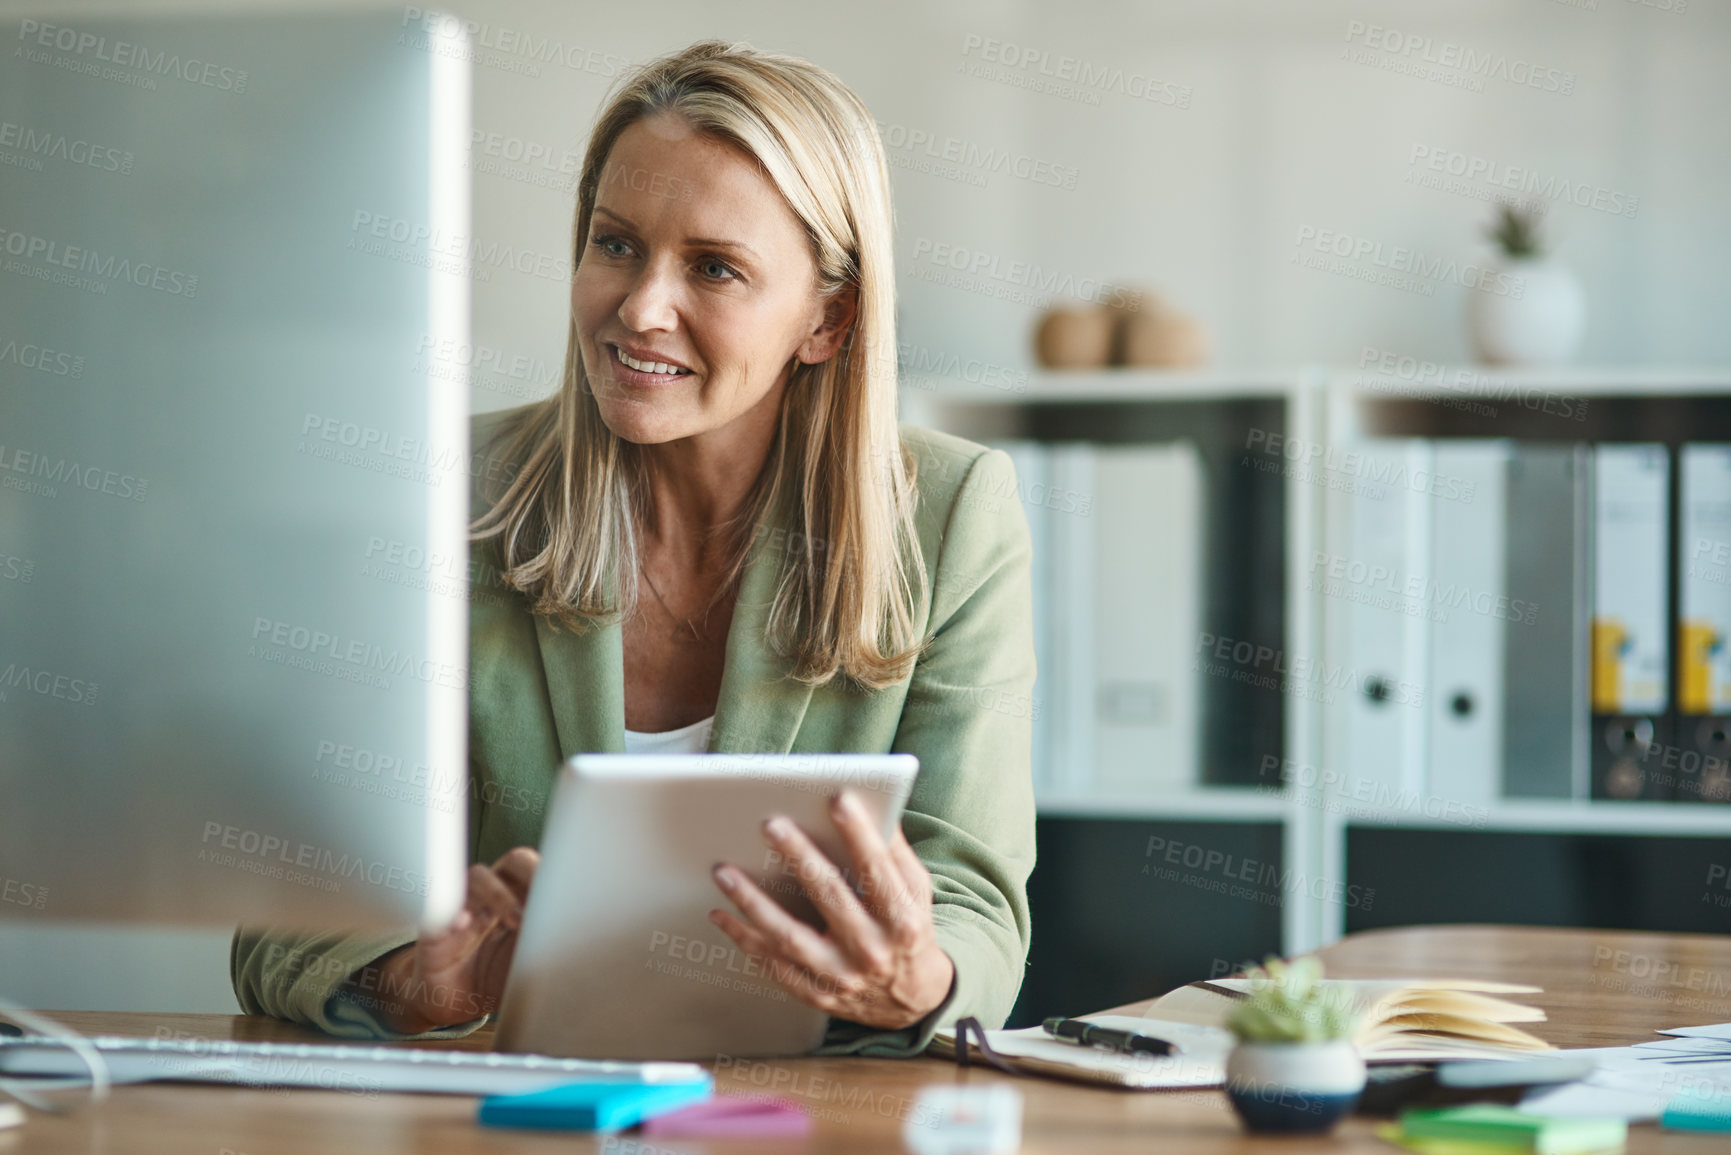 Buy stock photo Cropped shot of a mature businesswoman working on a tablet in her corporate office